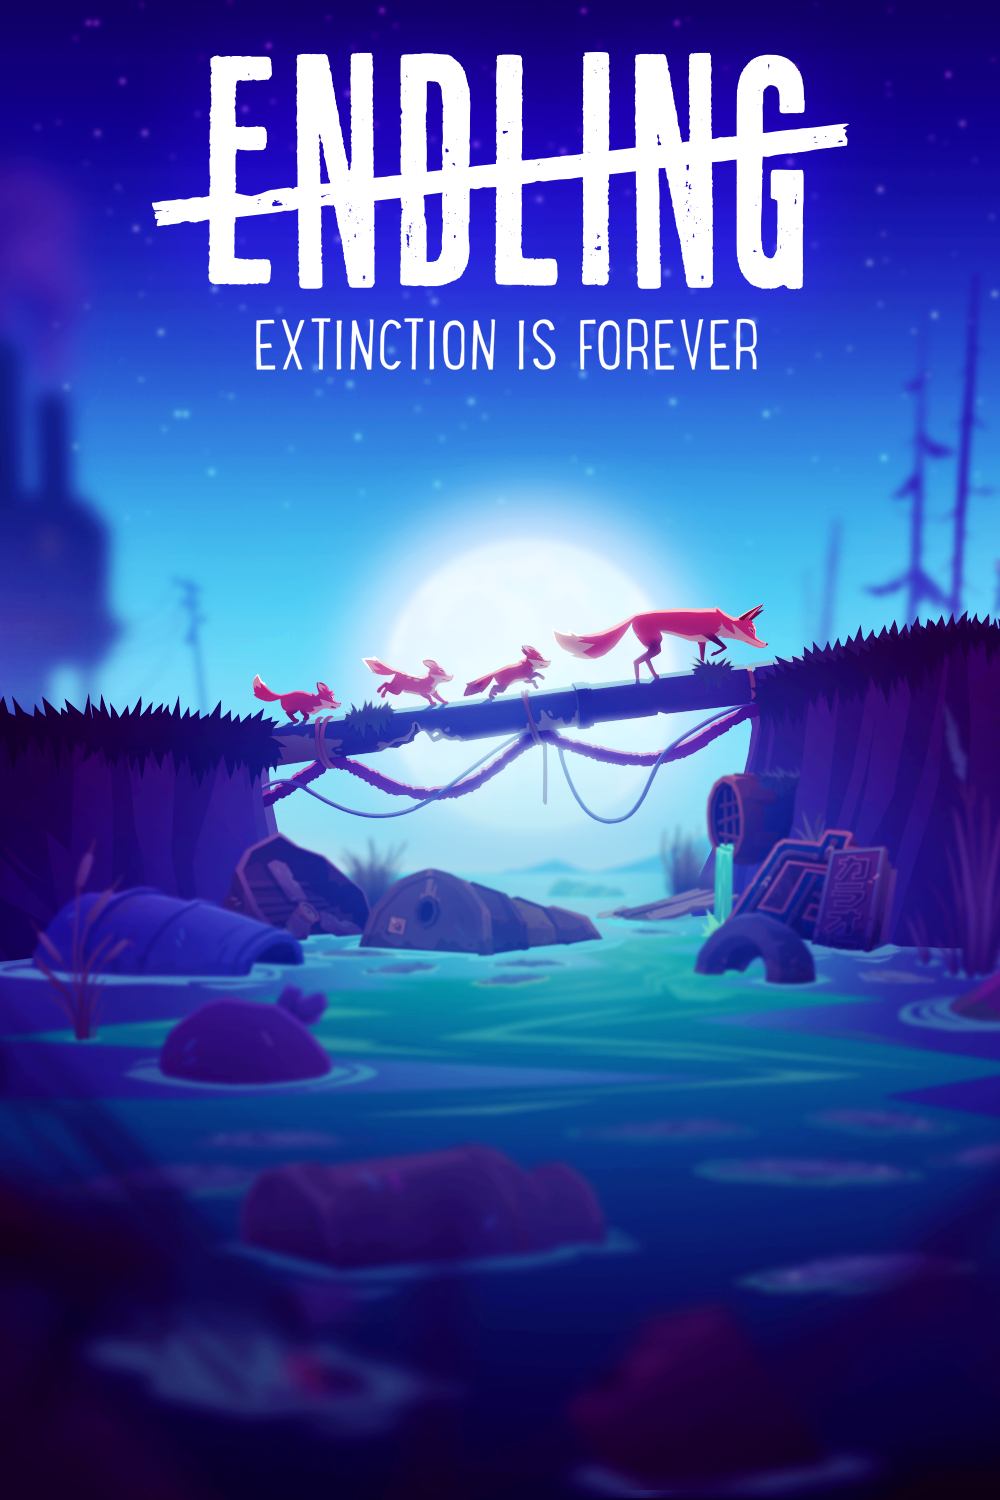 Endling Game: Release Date, Time to Beat and Information